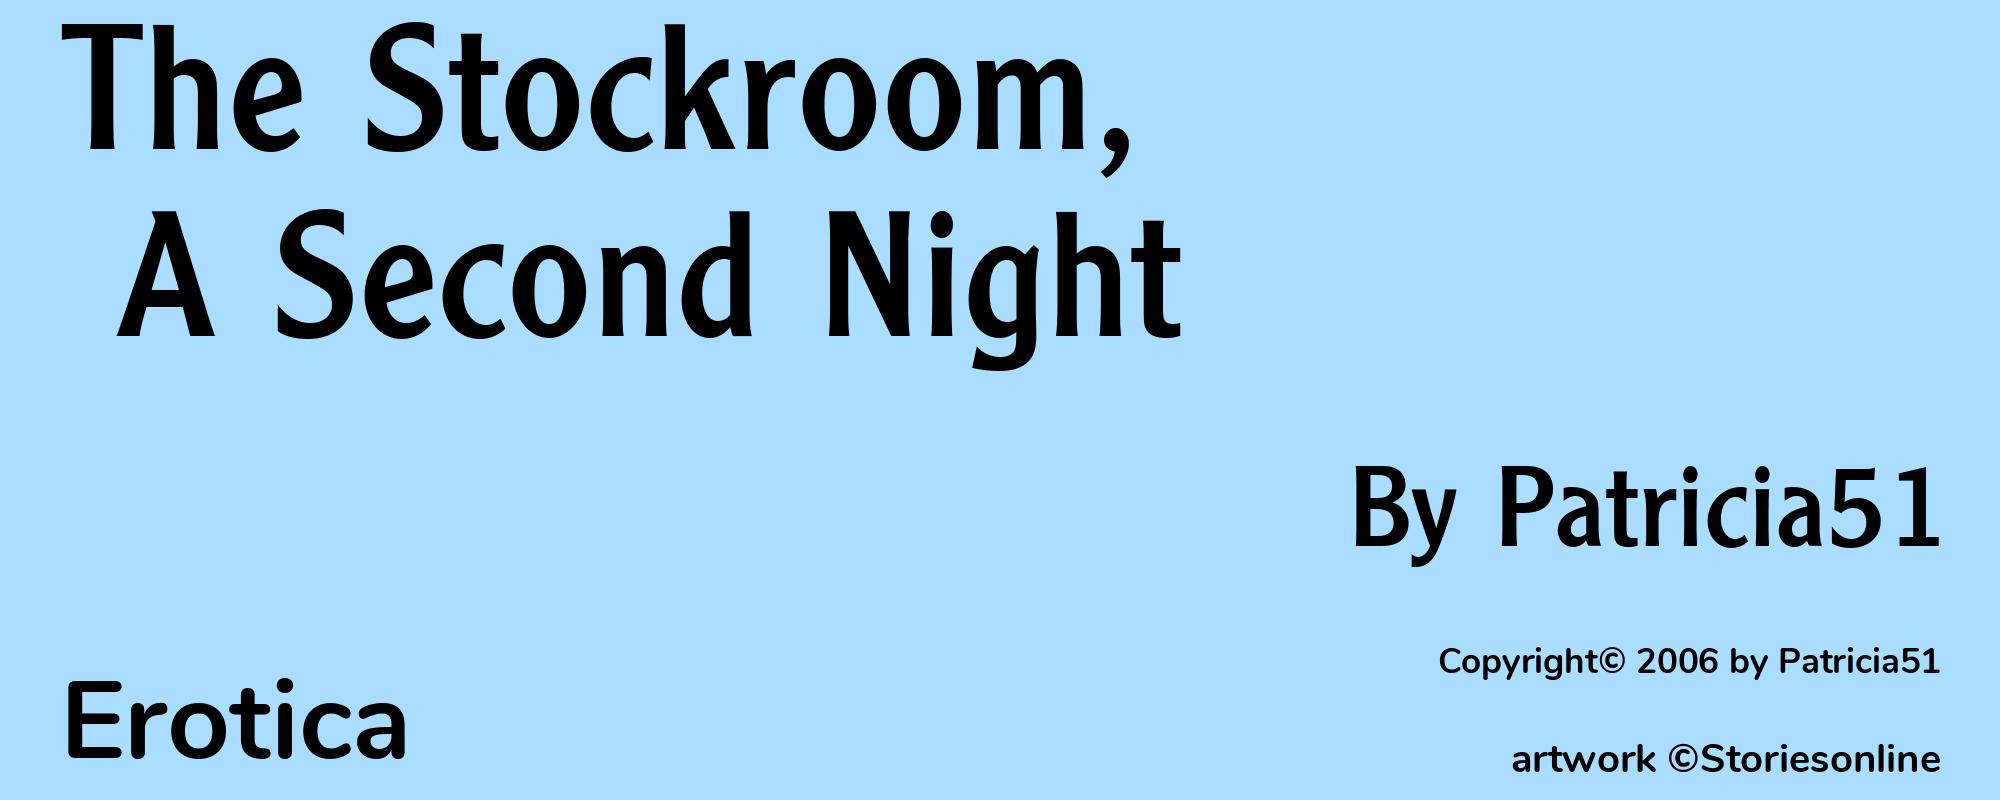 The Stockroom, A Second Night - Cover